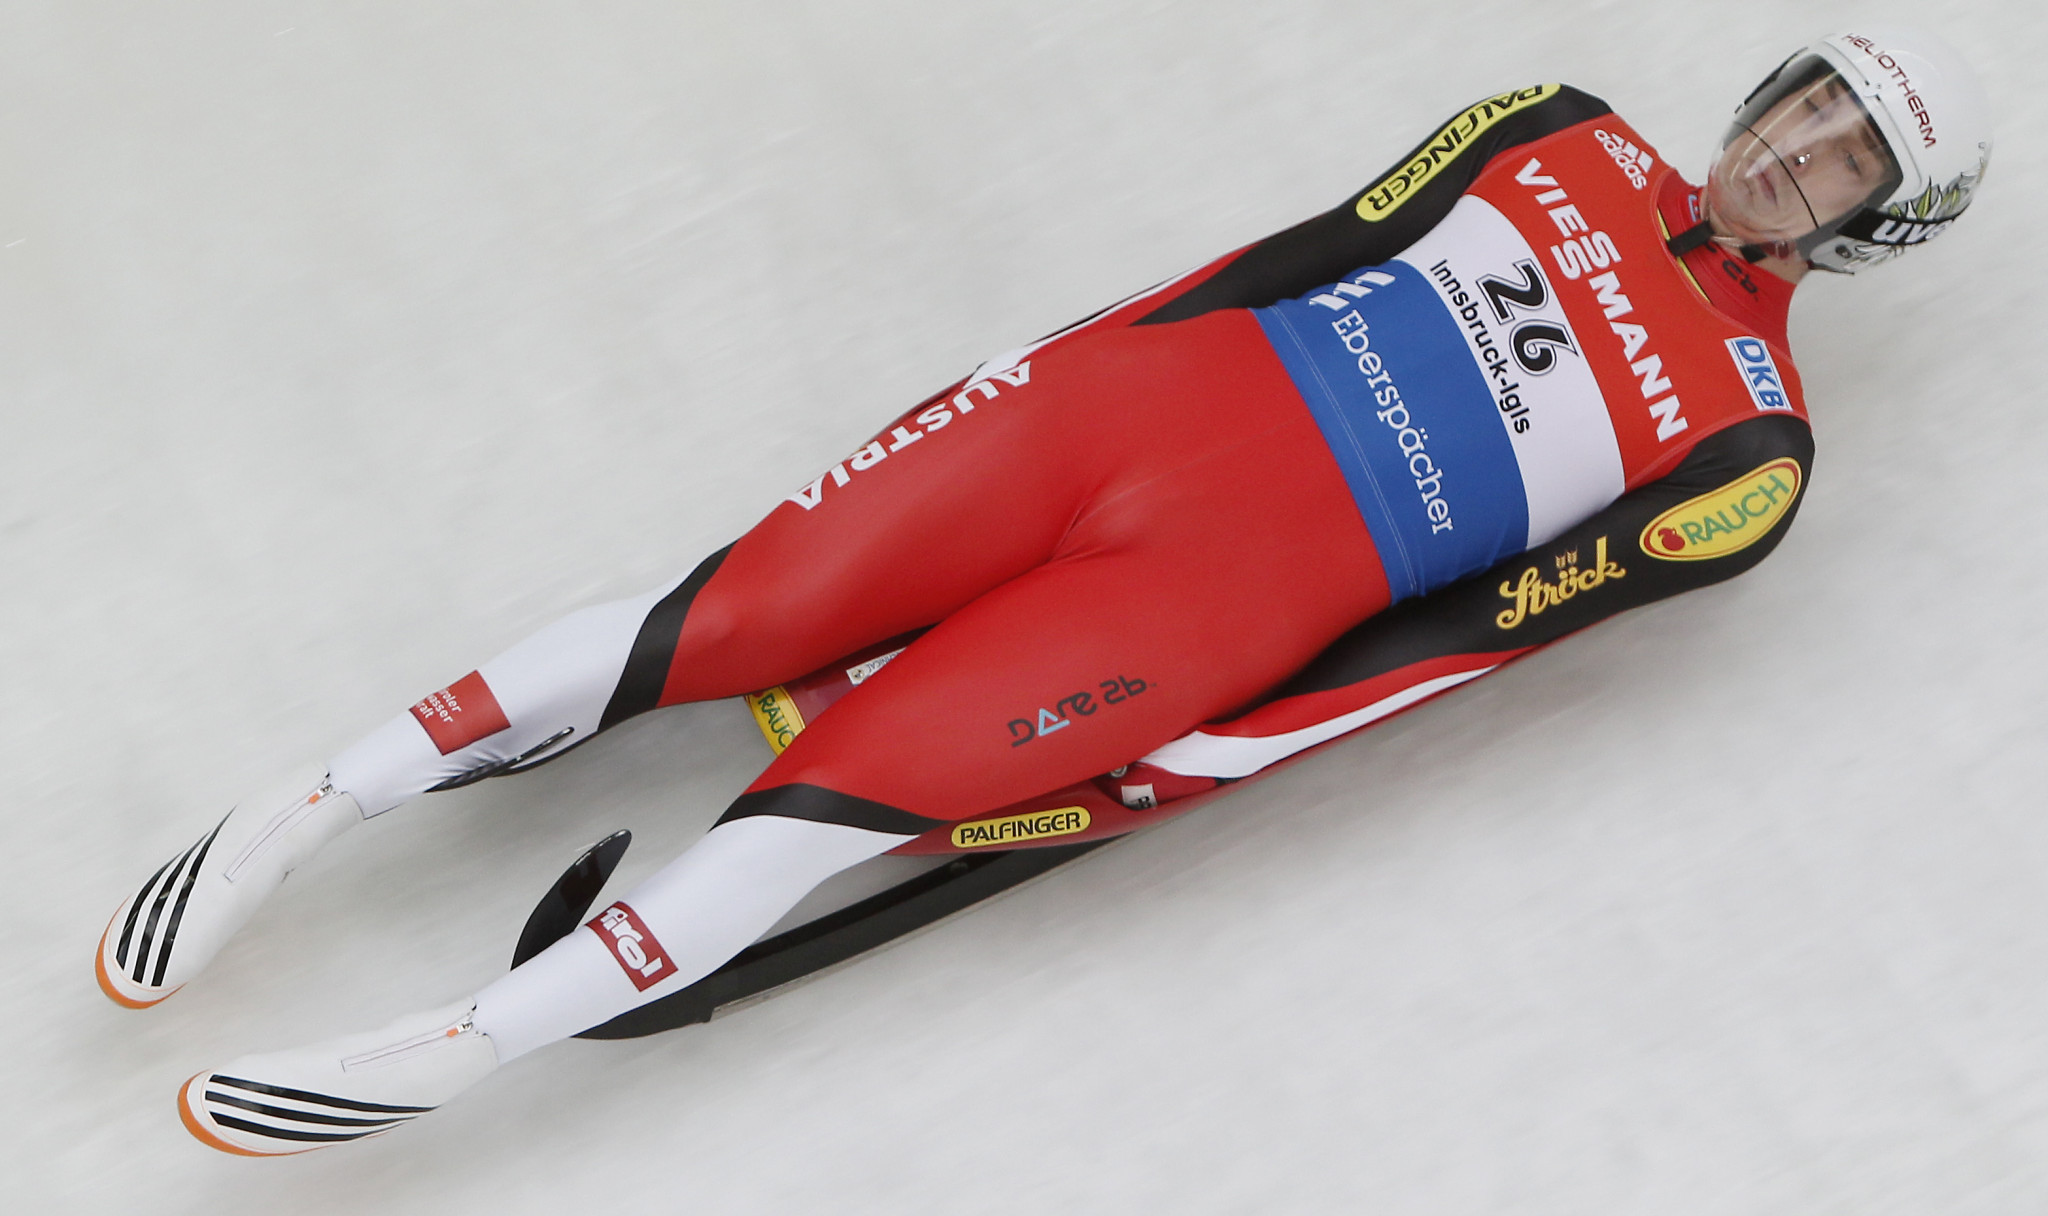 Reinhard Egger earned a maiden World Cup win in Königssee ©Getty Images